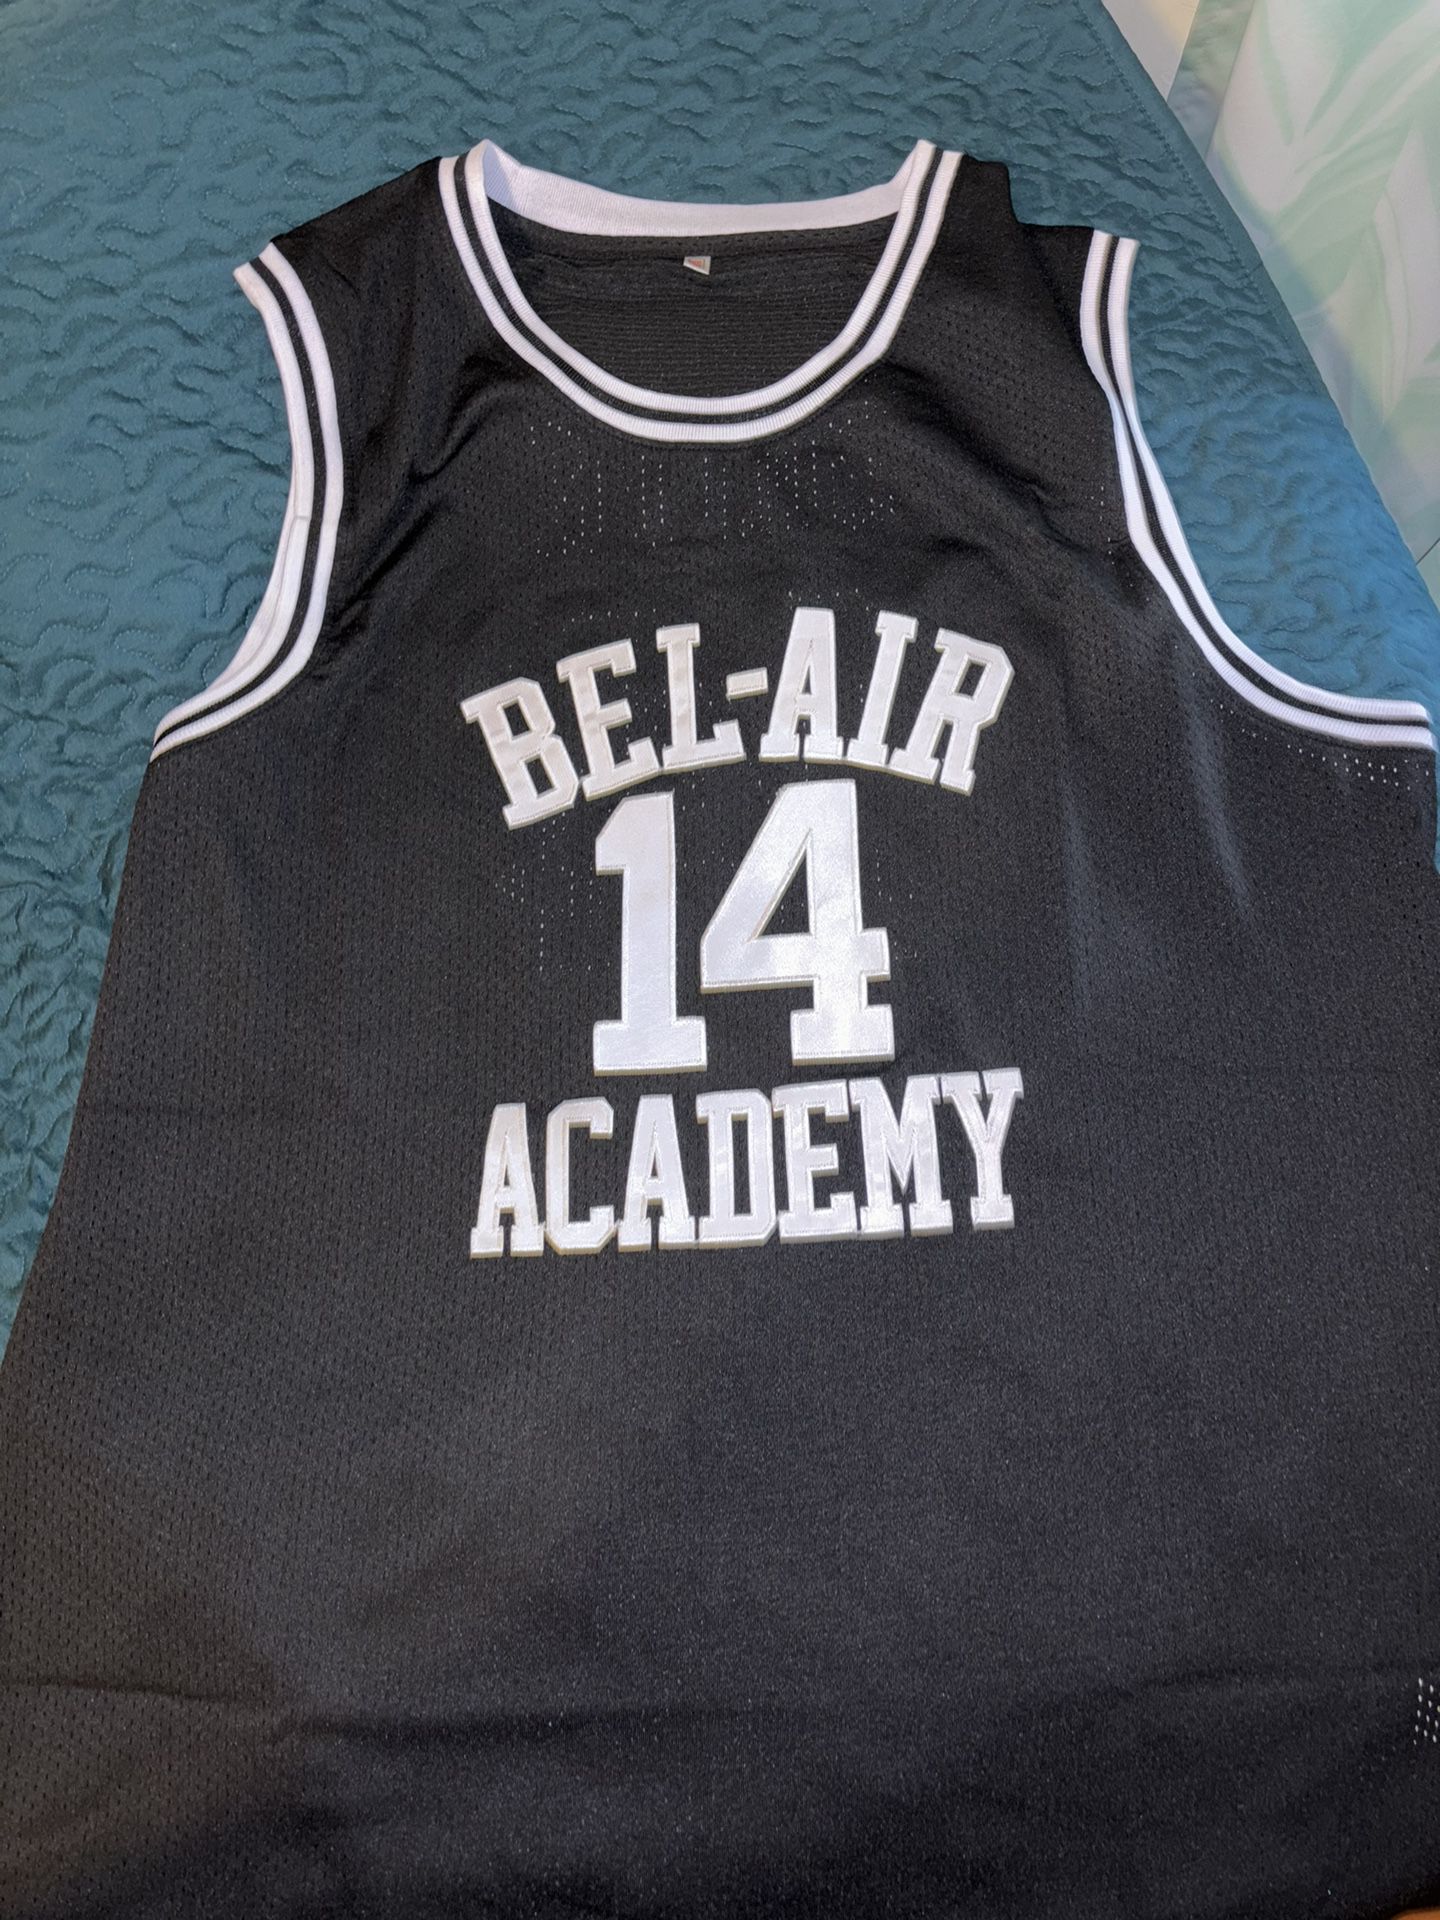 Fresh Prince of Bel Air #14 Will Smith Basketball Jersey Mens - NEW Size 3XL